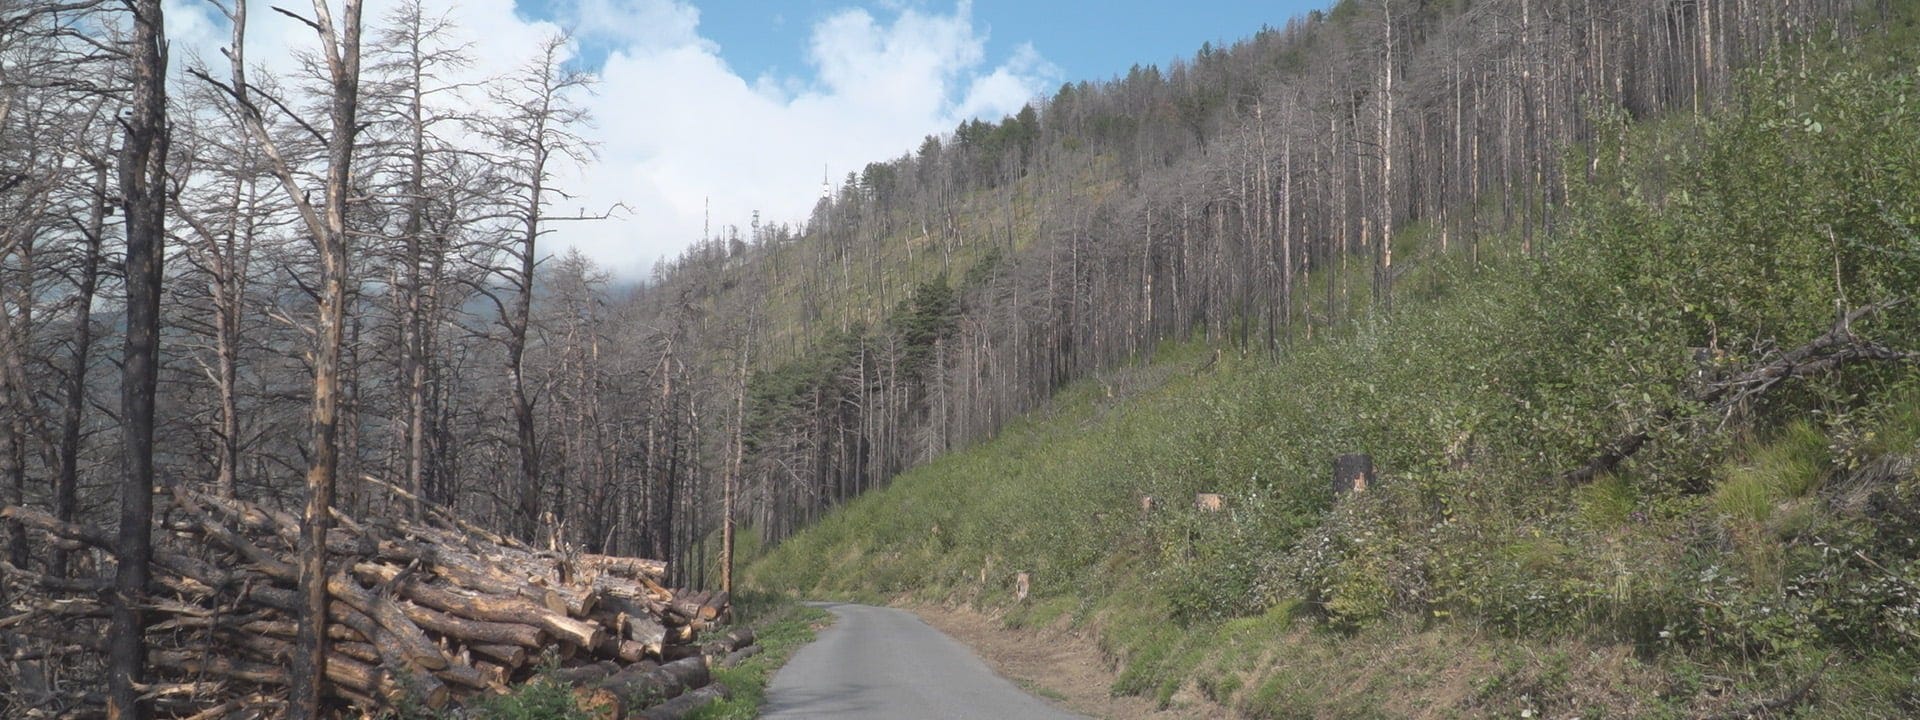 The LT40 Wood-Mizer sawmill helps to rebuild forest after the wildfire in Italy